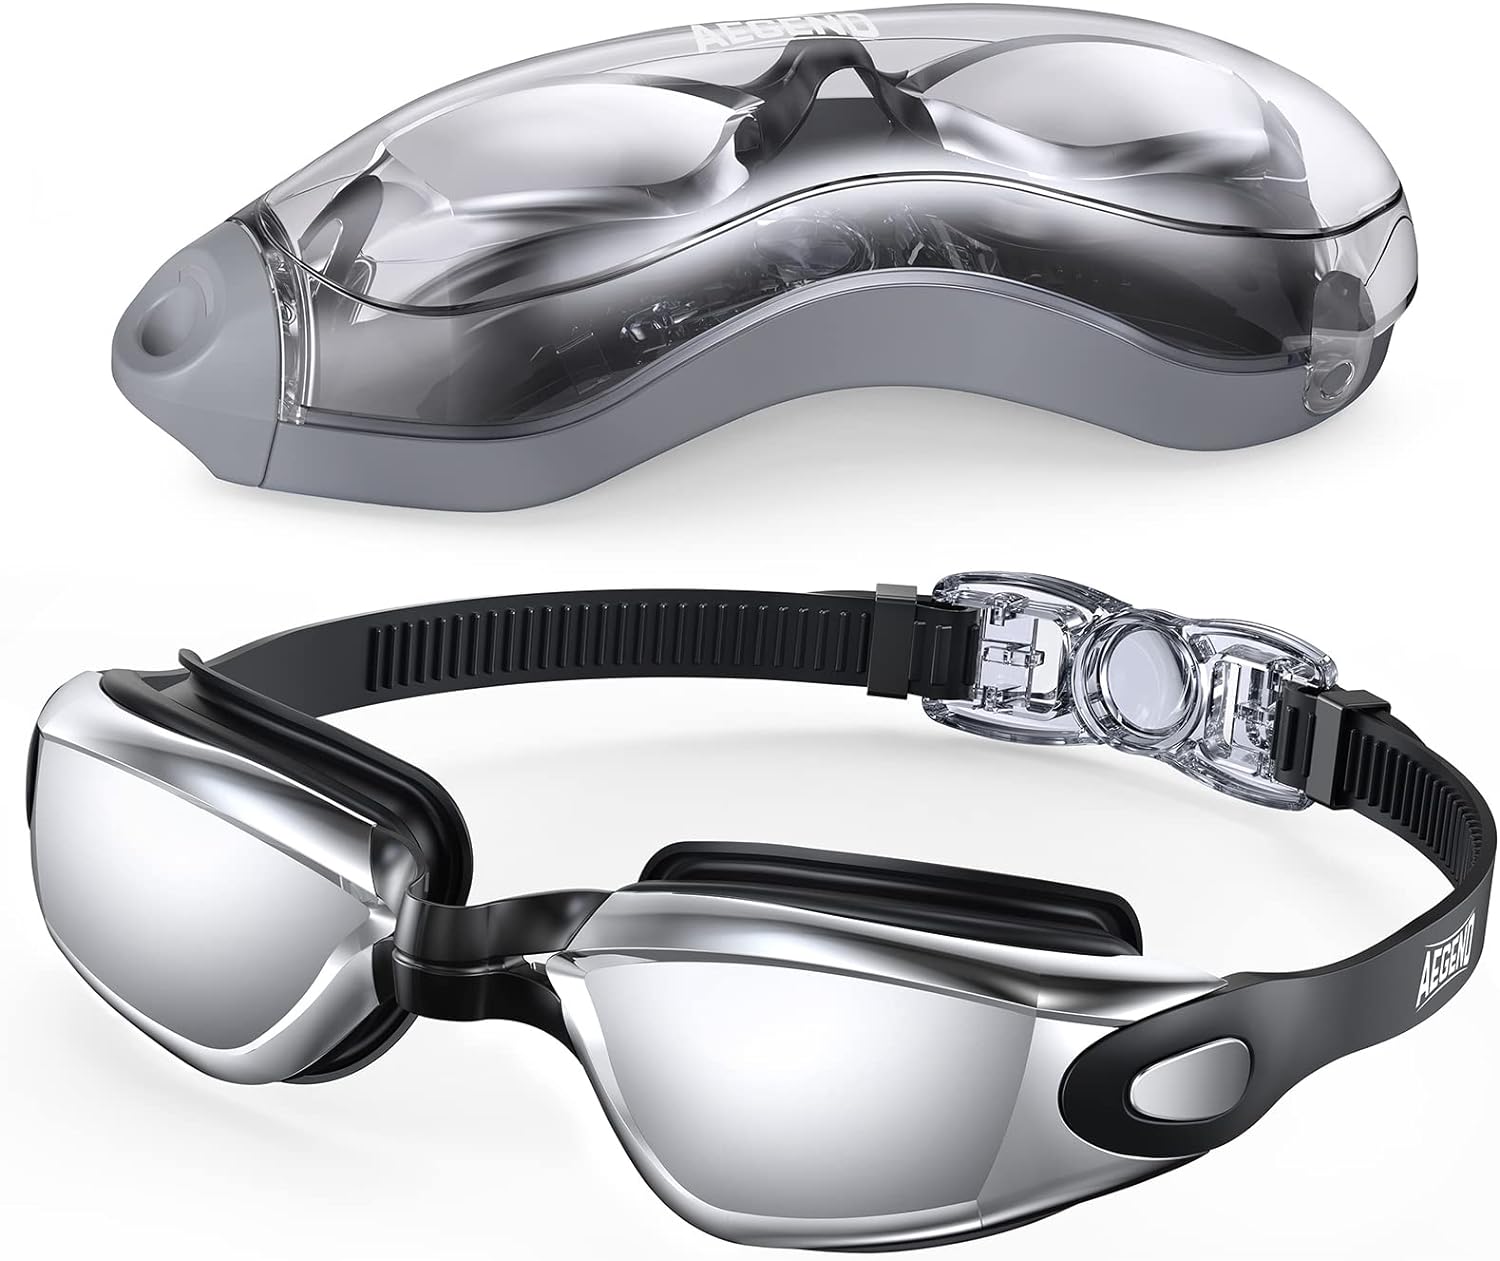 Aegend Swim Goggles - Limited-Time Promo! Up to 55% Off!